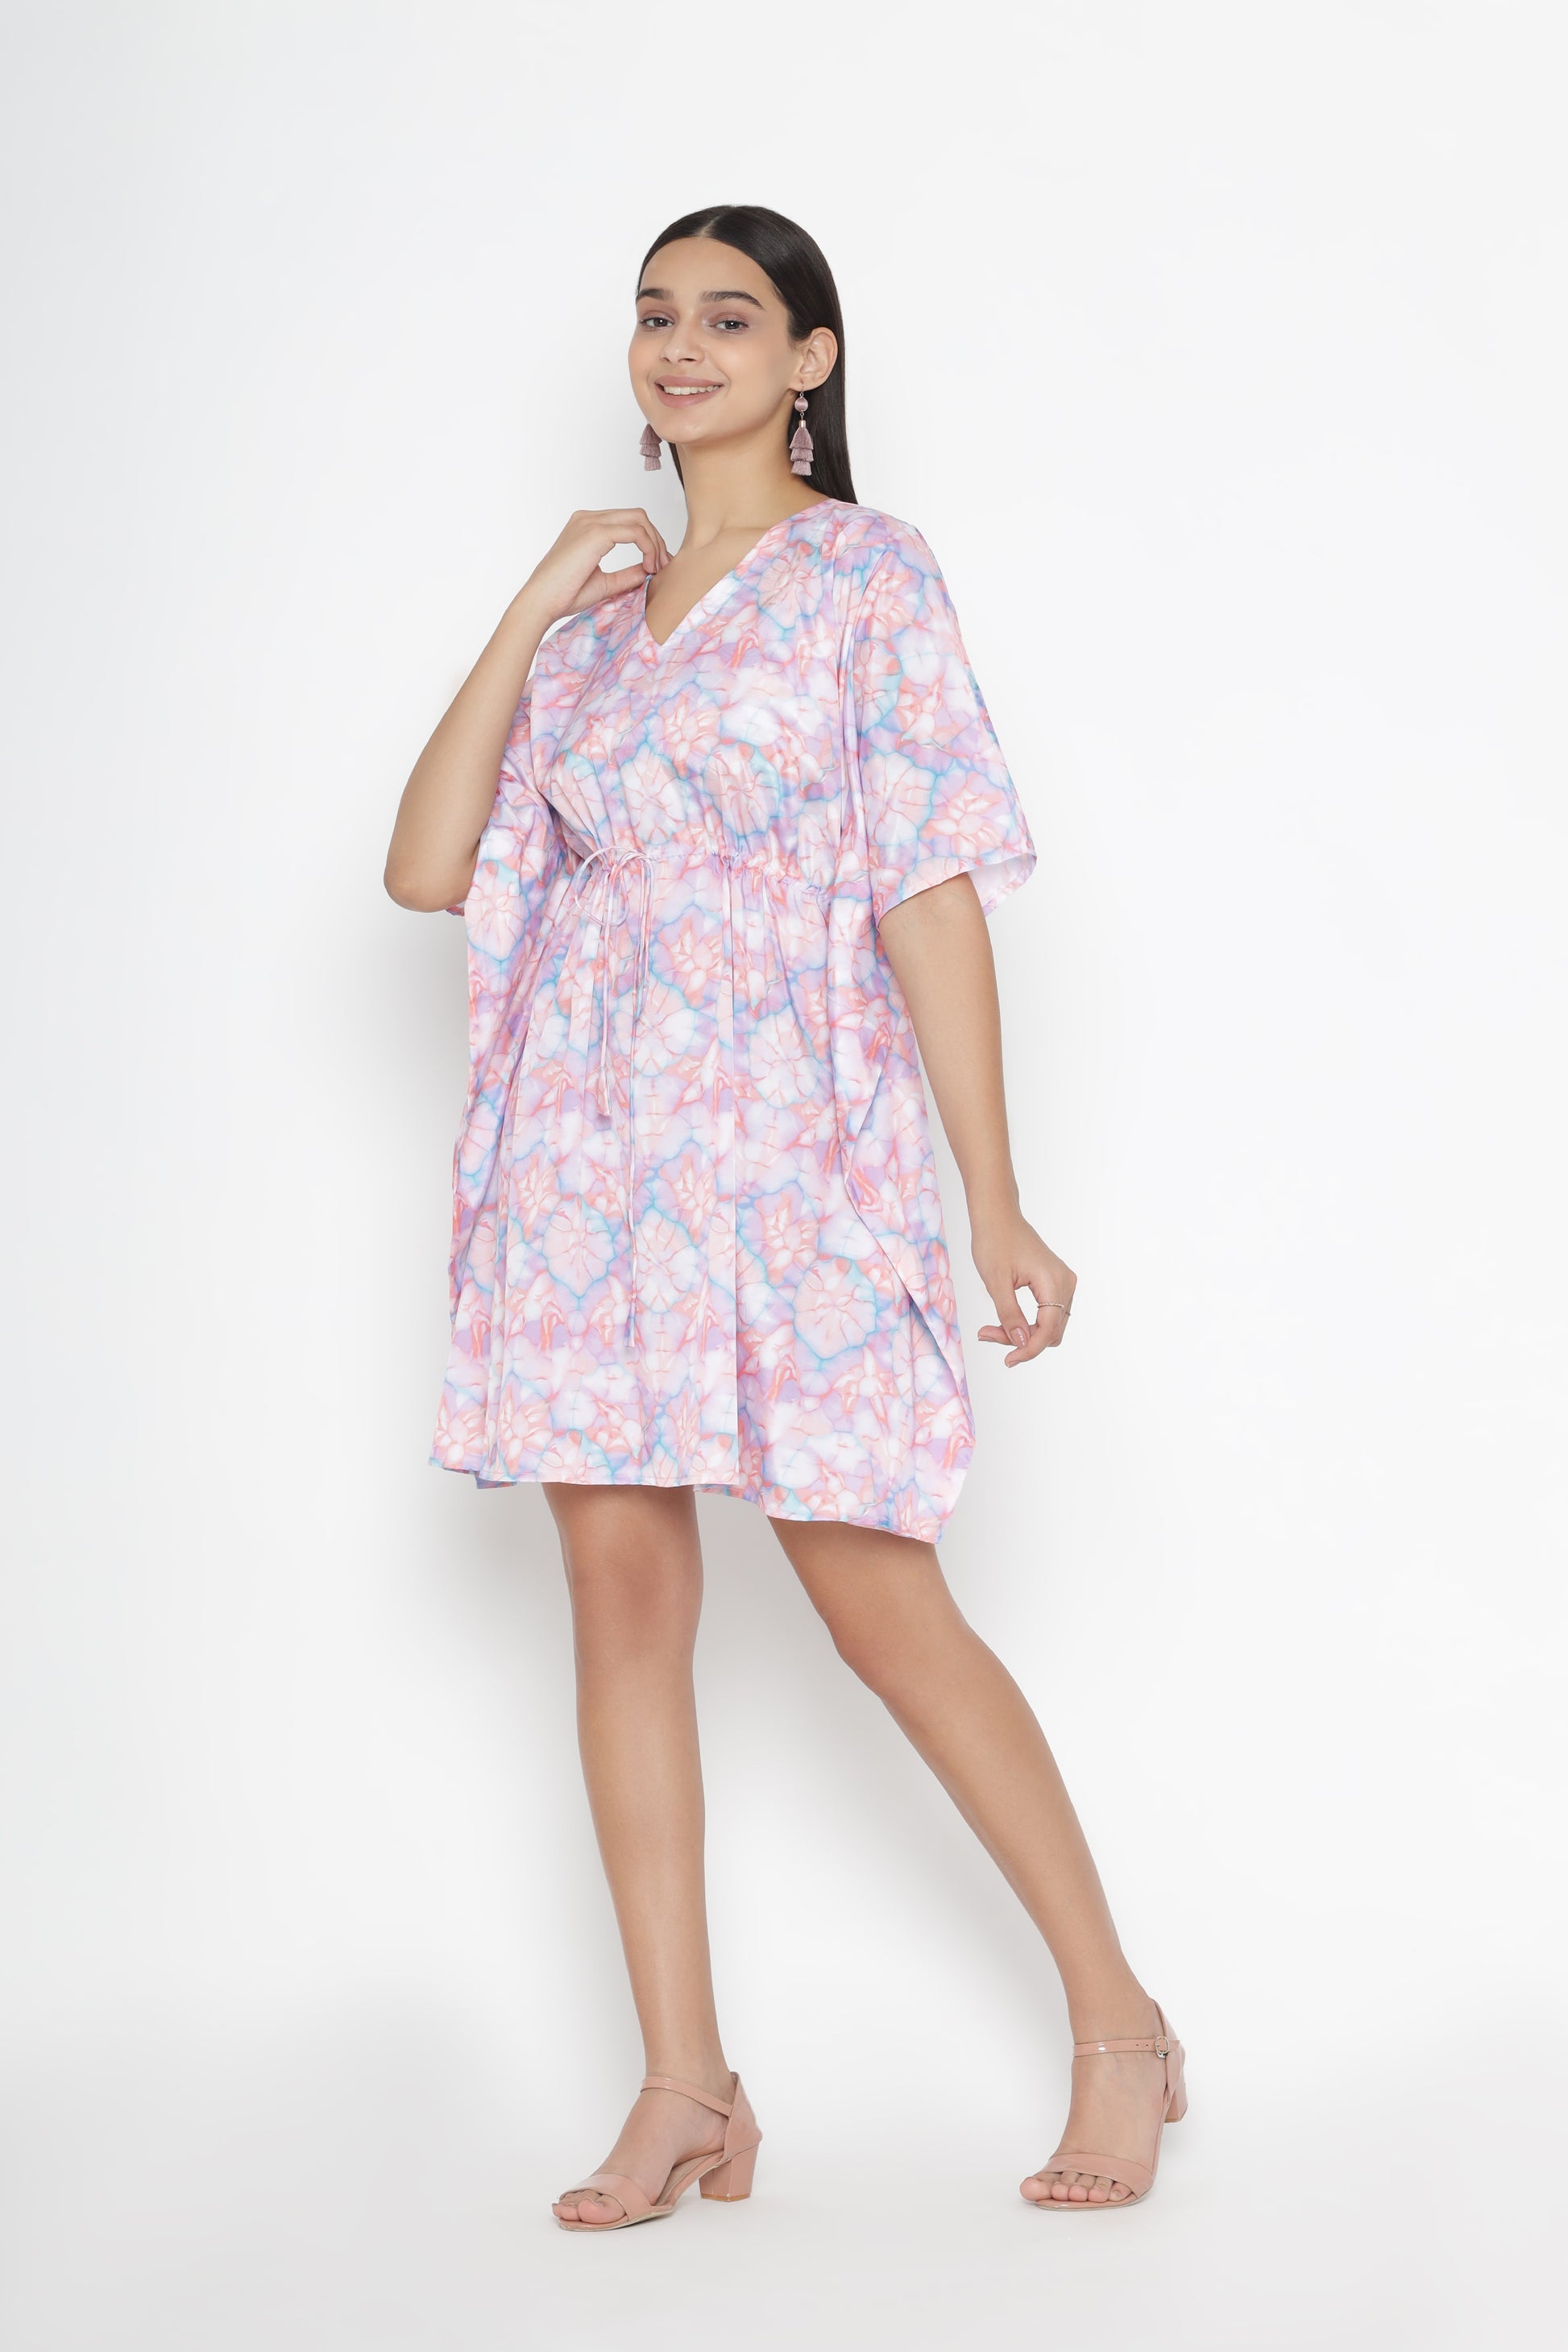 Purple Floral A-Line Dress  From Octics At Rs  | OCTICS